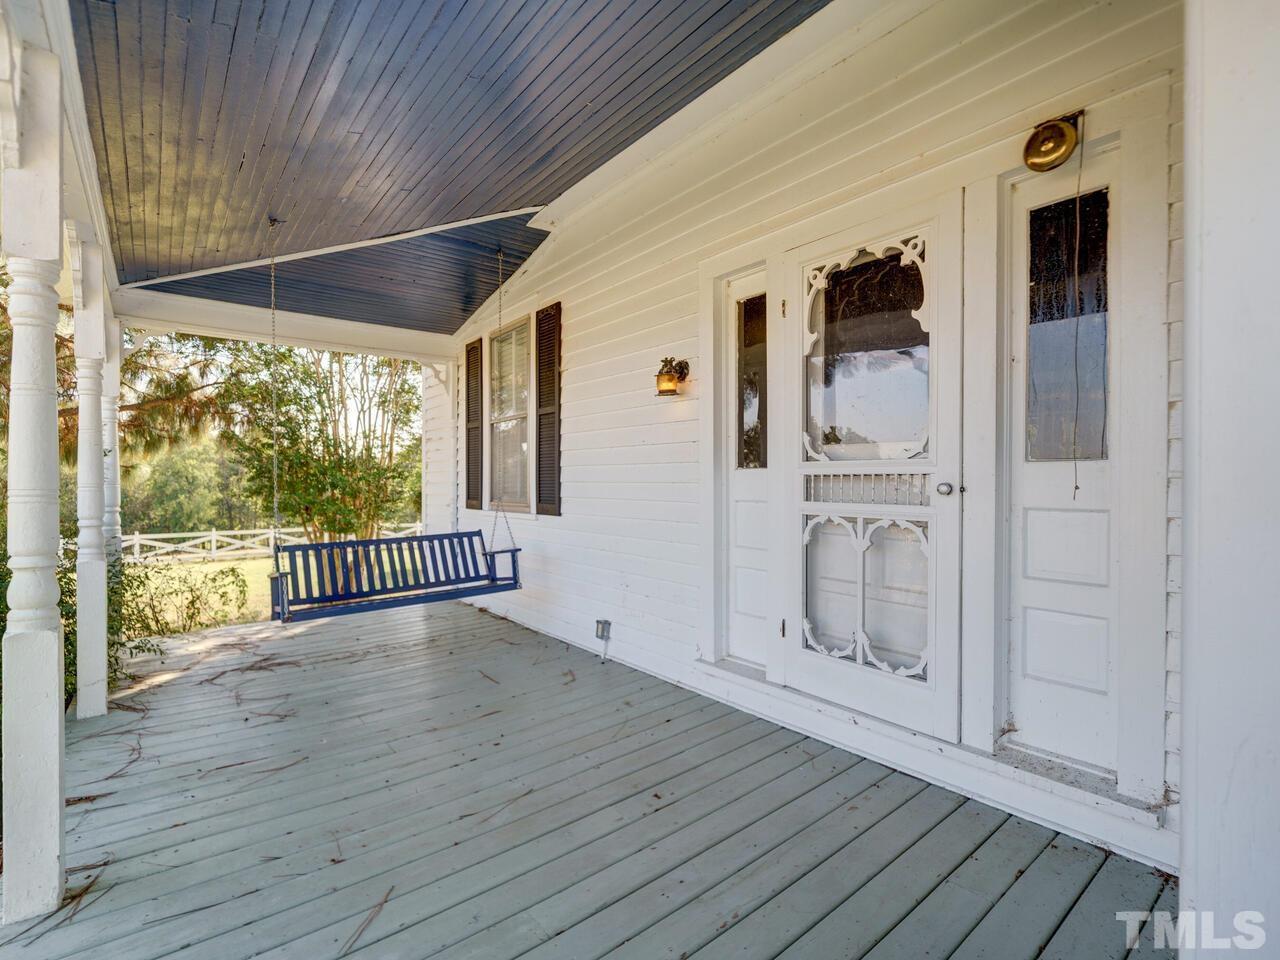 a Rocking chair porch on the Guest Home-perfect place for a lazy Sunday afternoon. Rental potential!